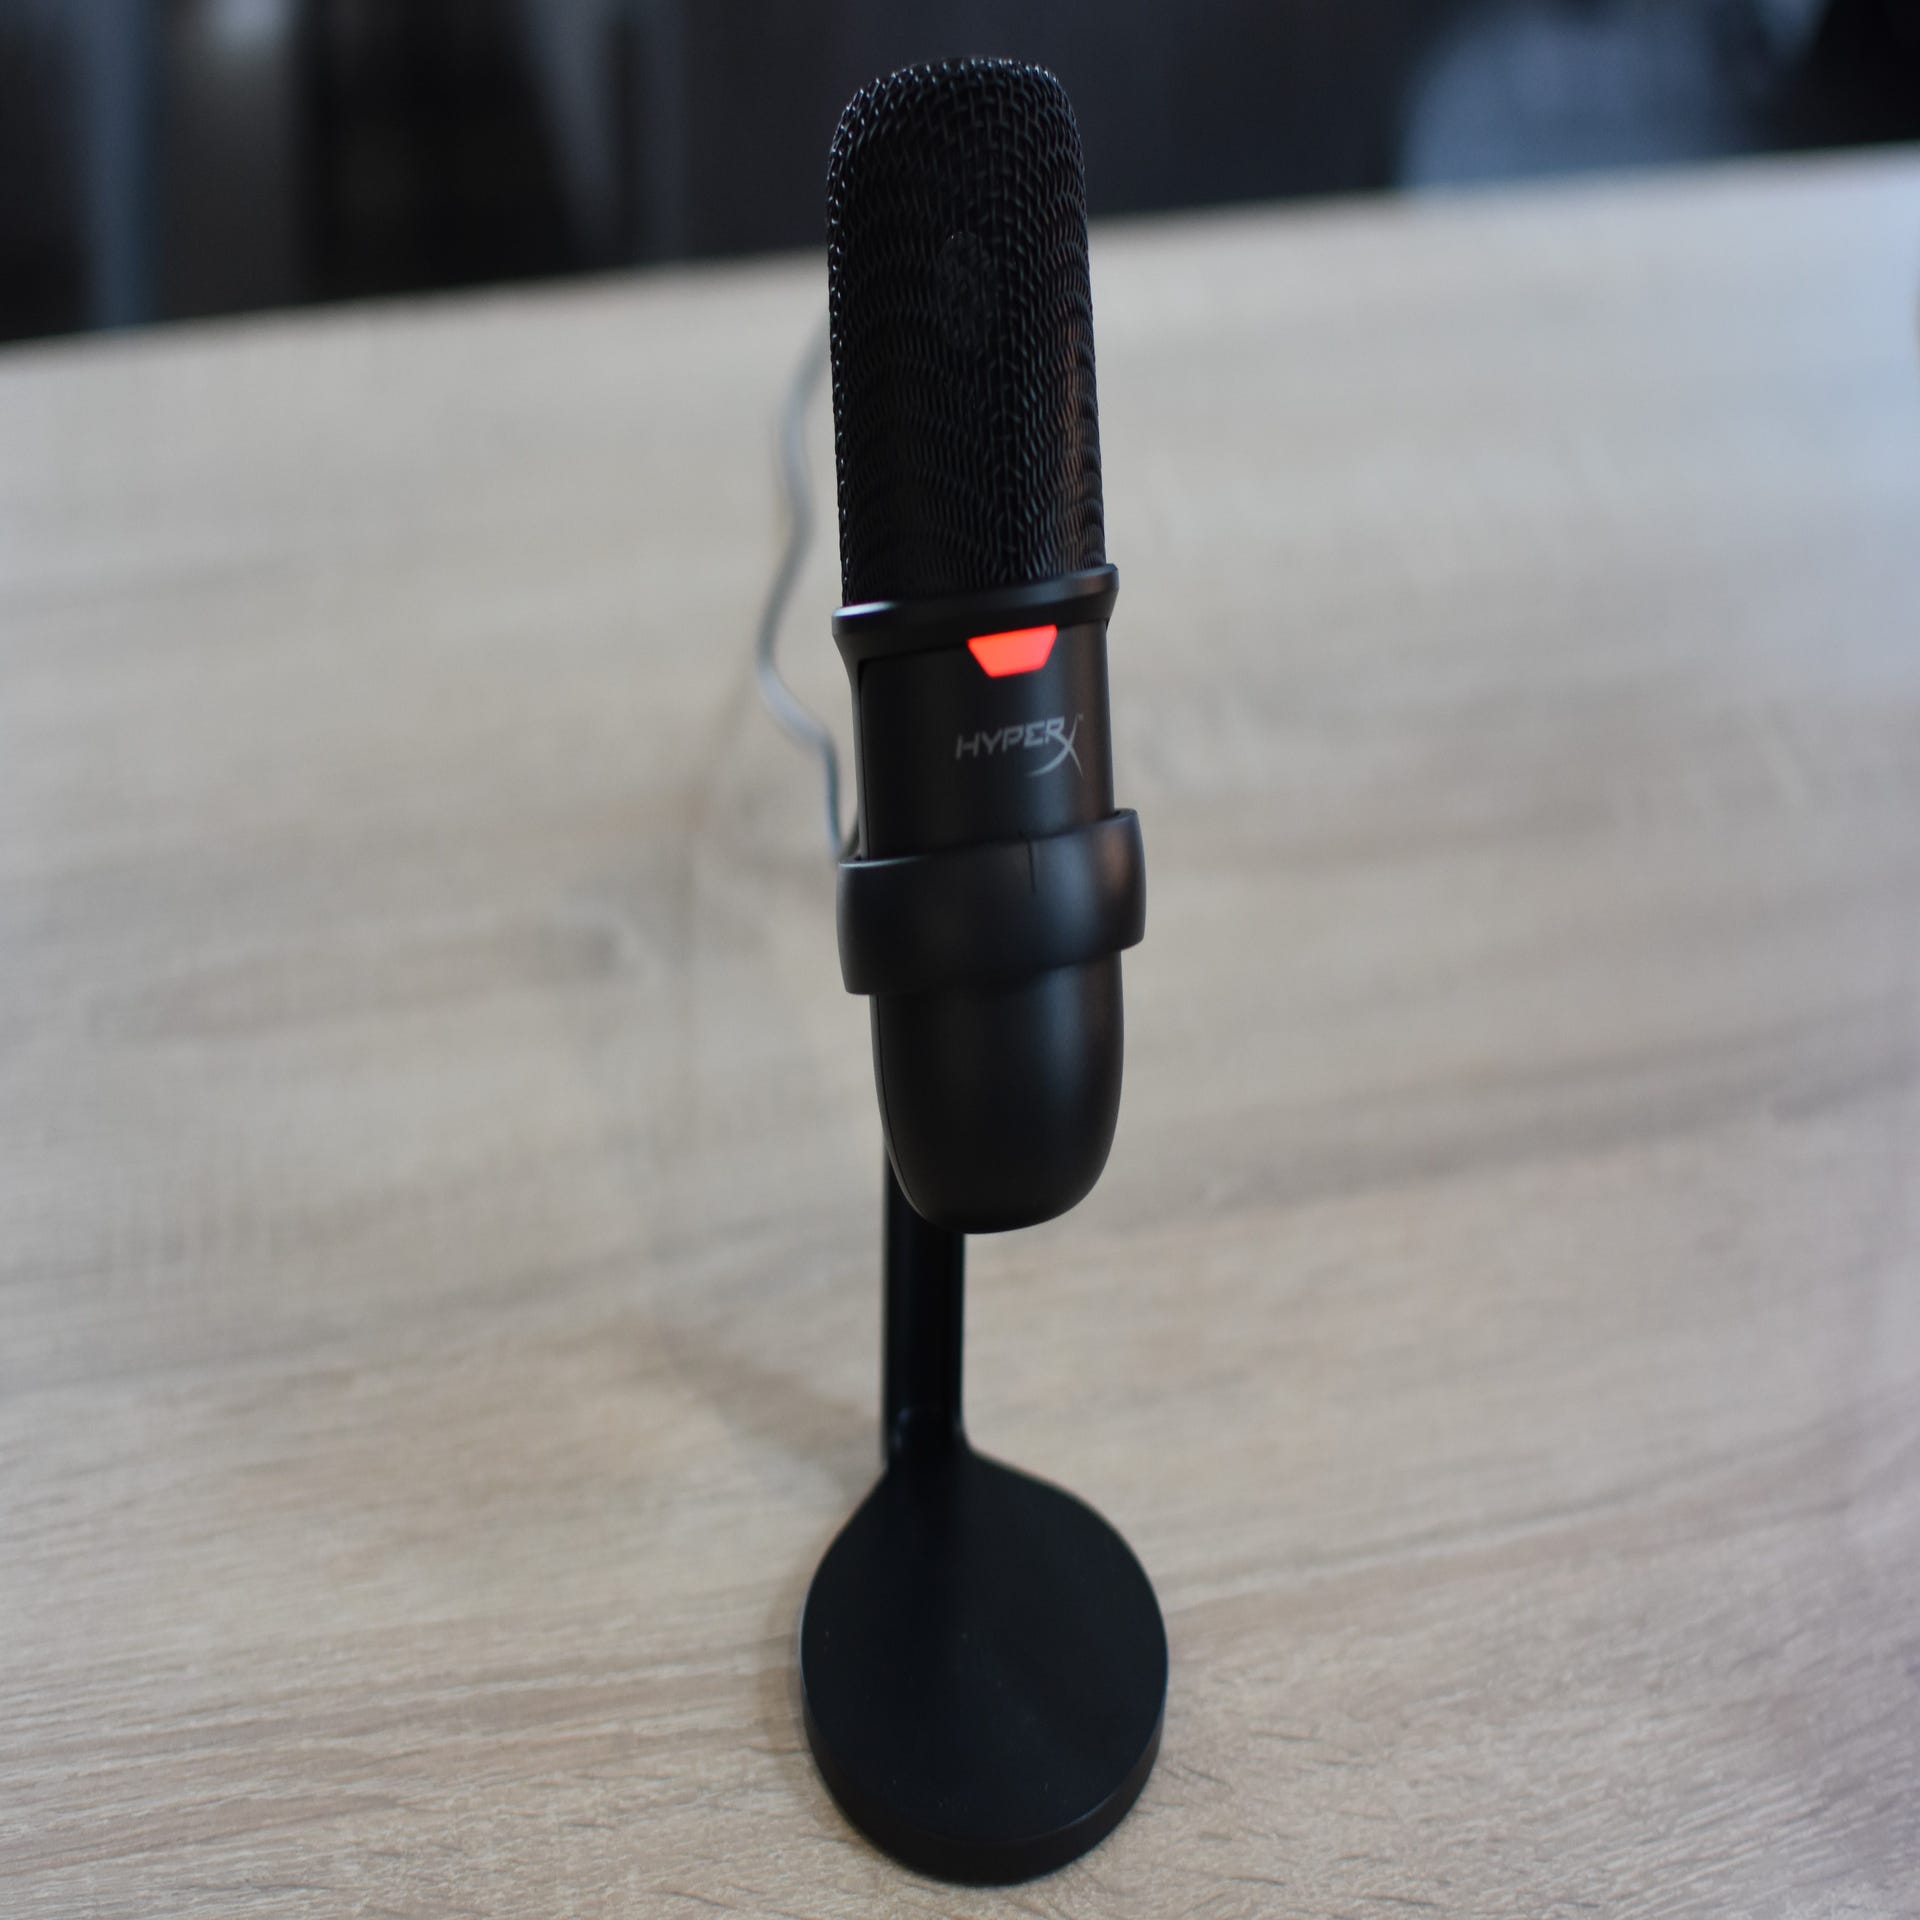 HyperX SoloCast Gaming Microphone